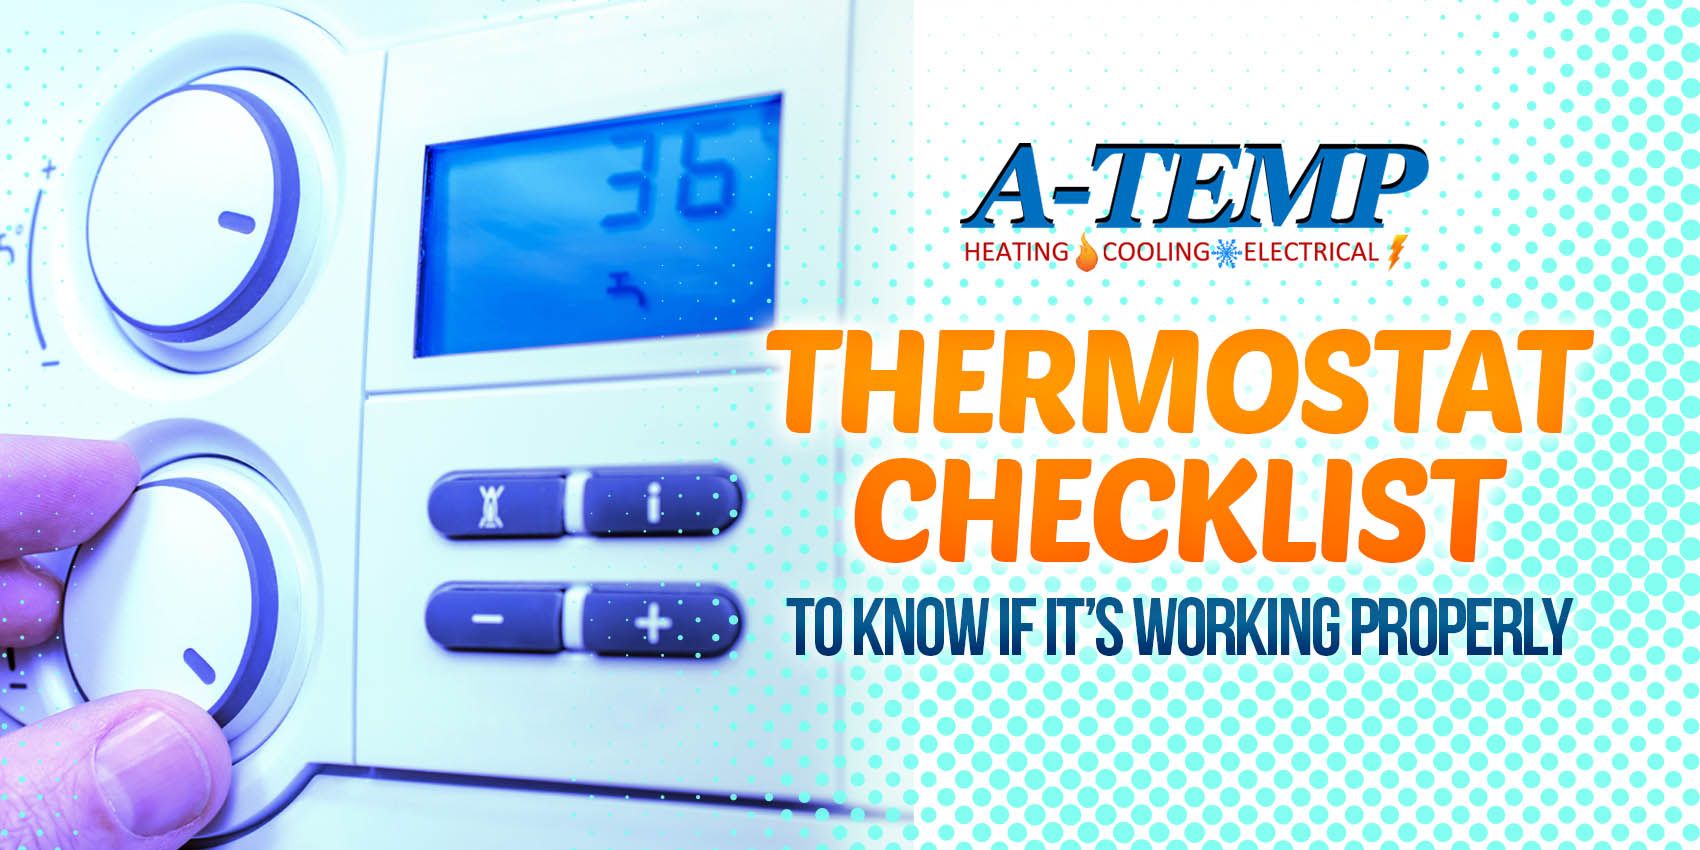 Thermostat Checklist to Know If It's Working Properly